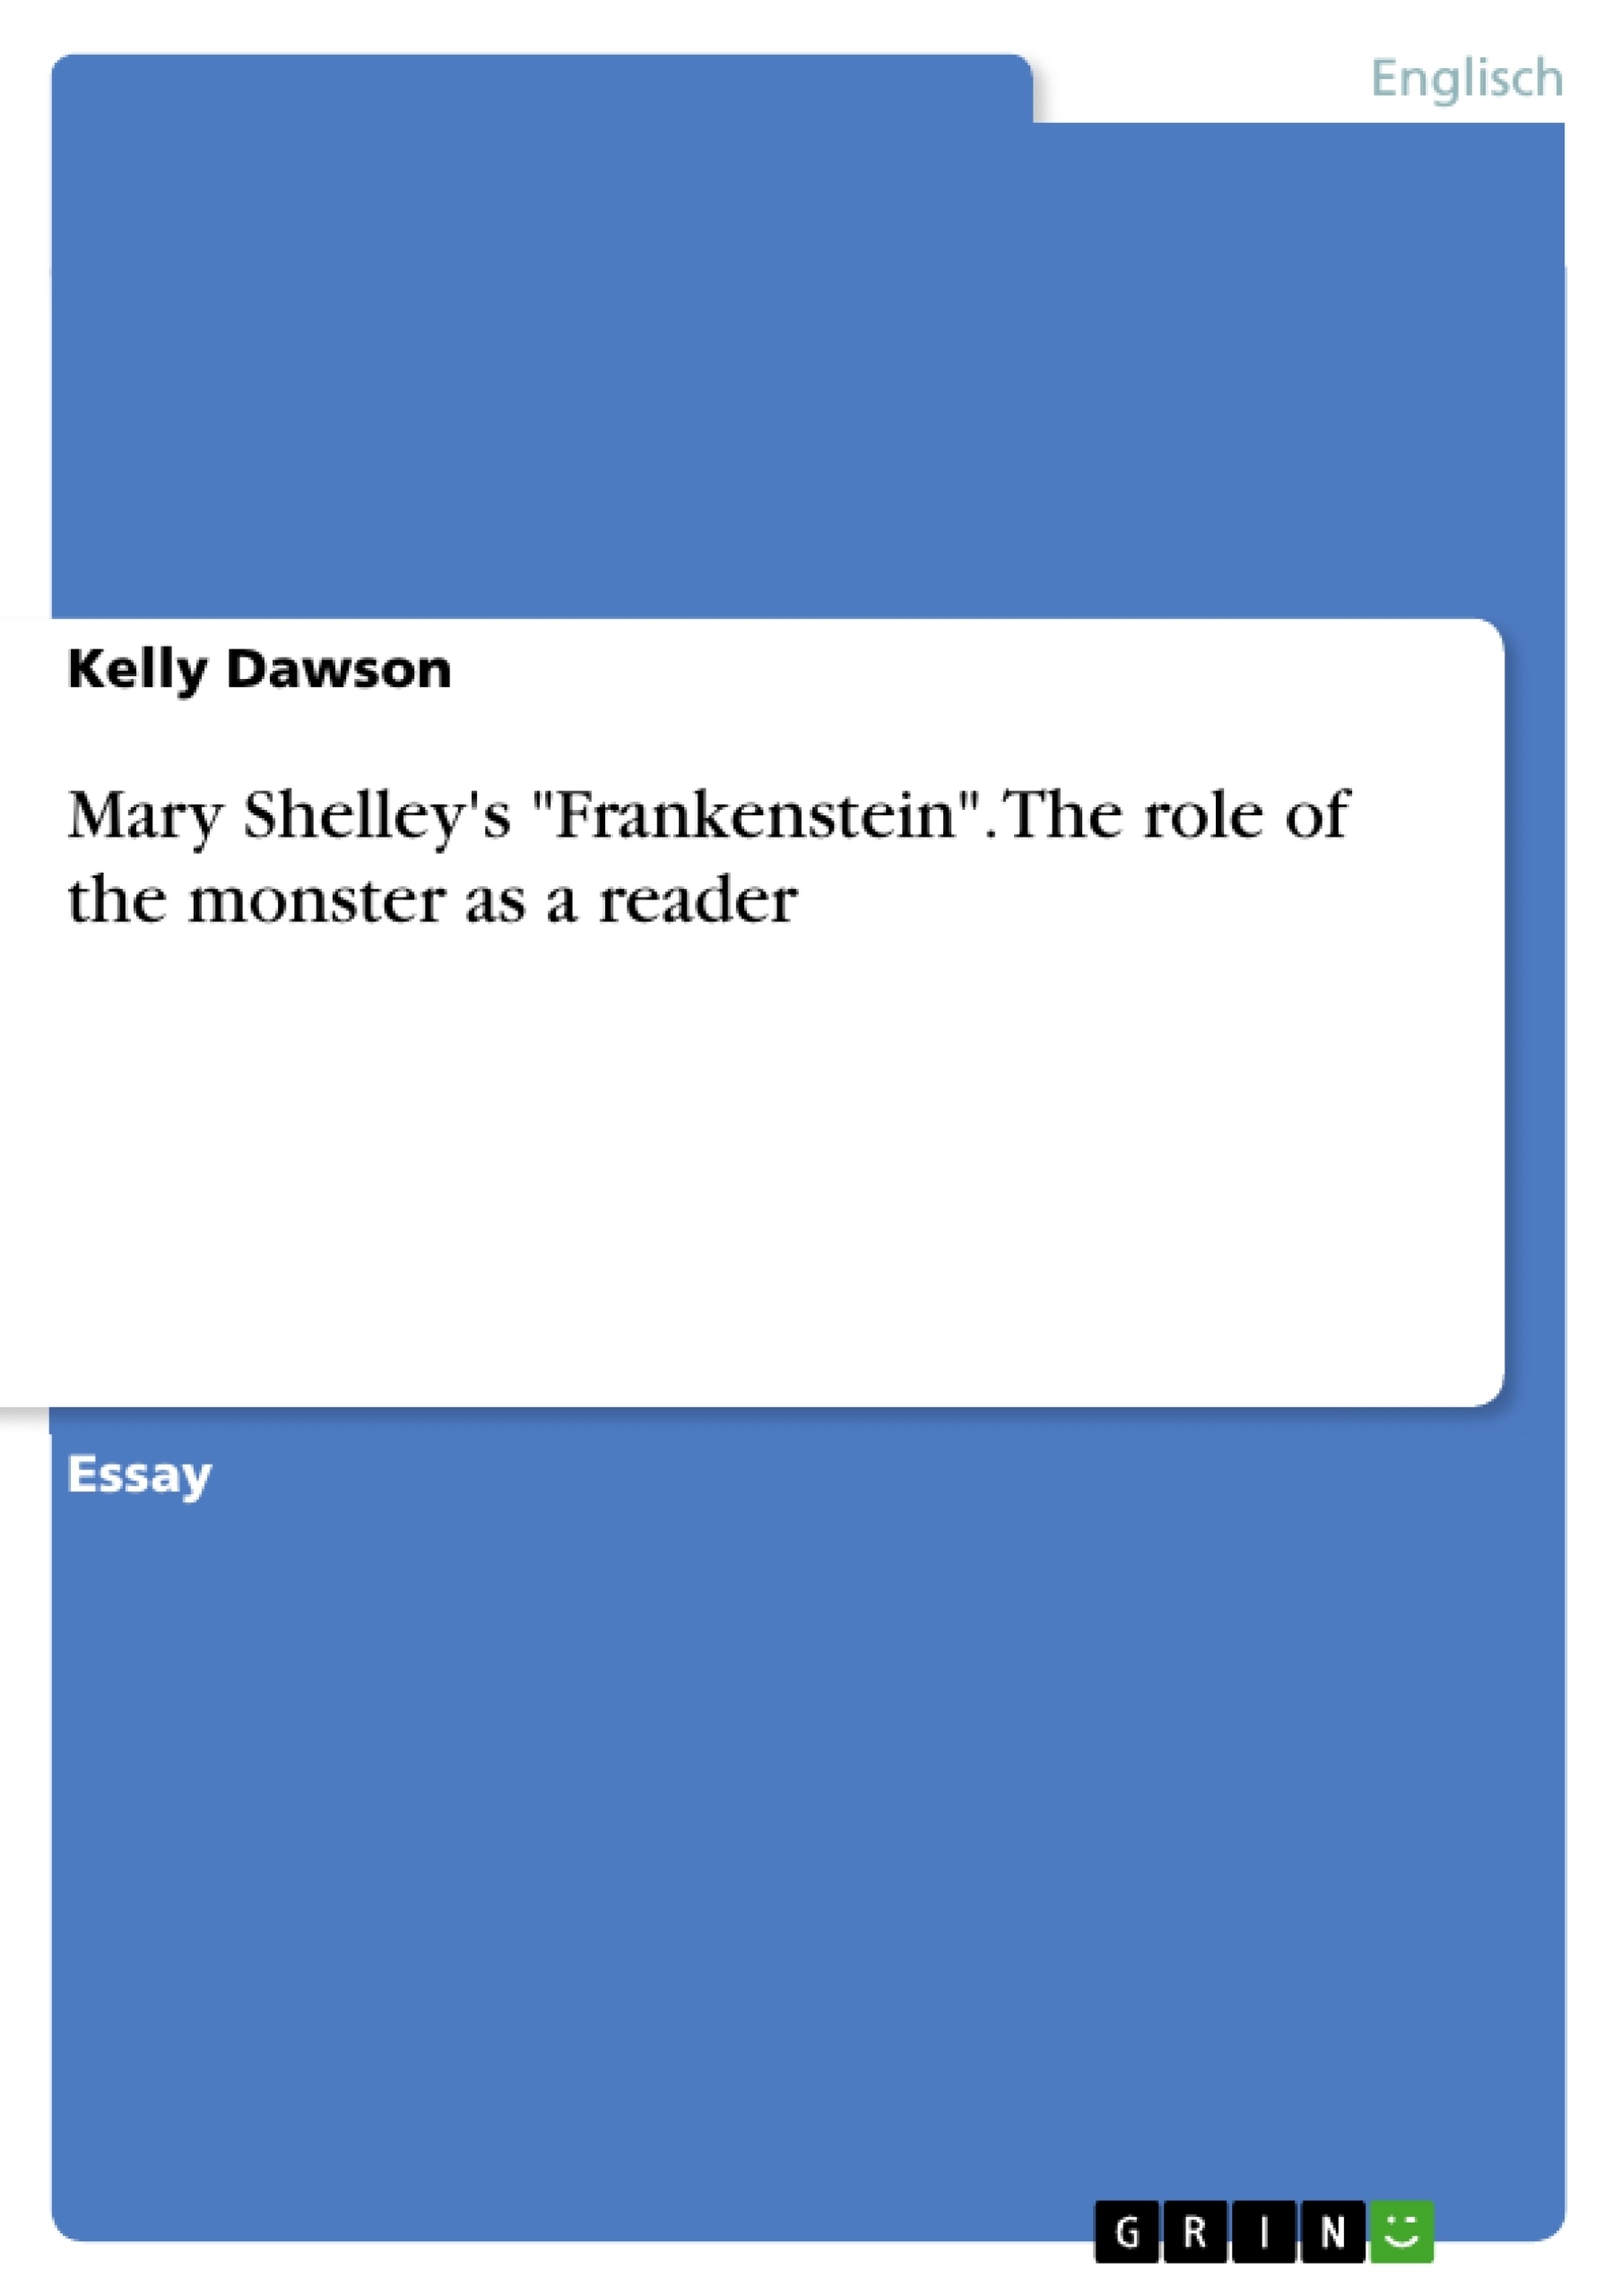 Titre: Mary Shelley's "Frankenstein". The role of the monster as a reader